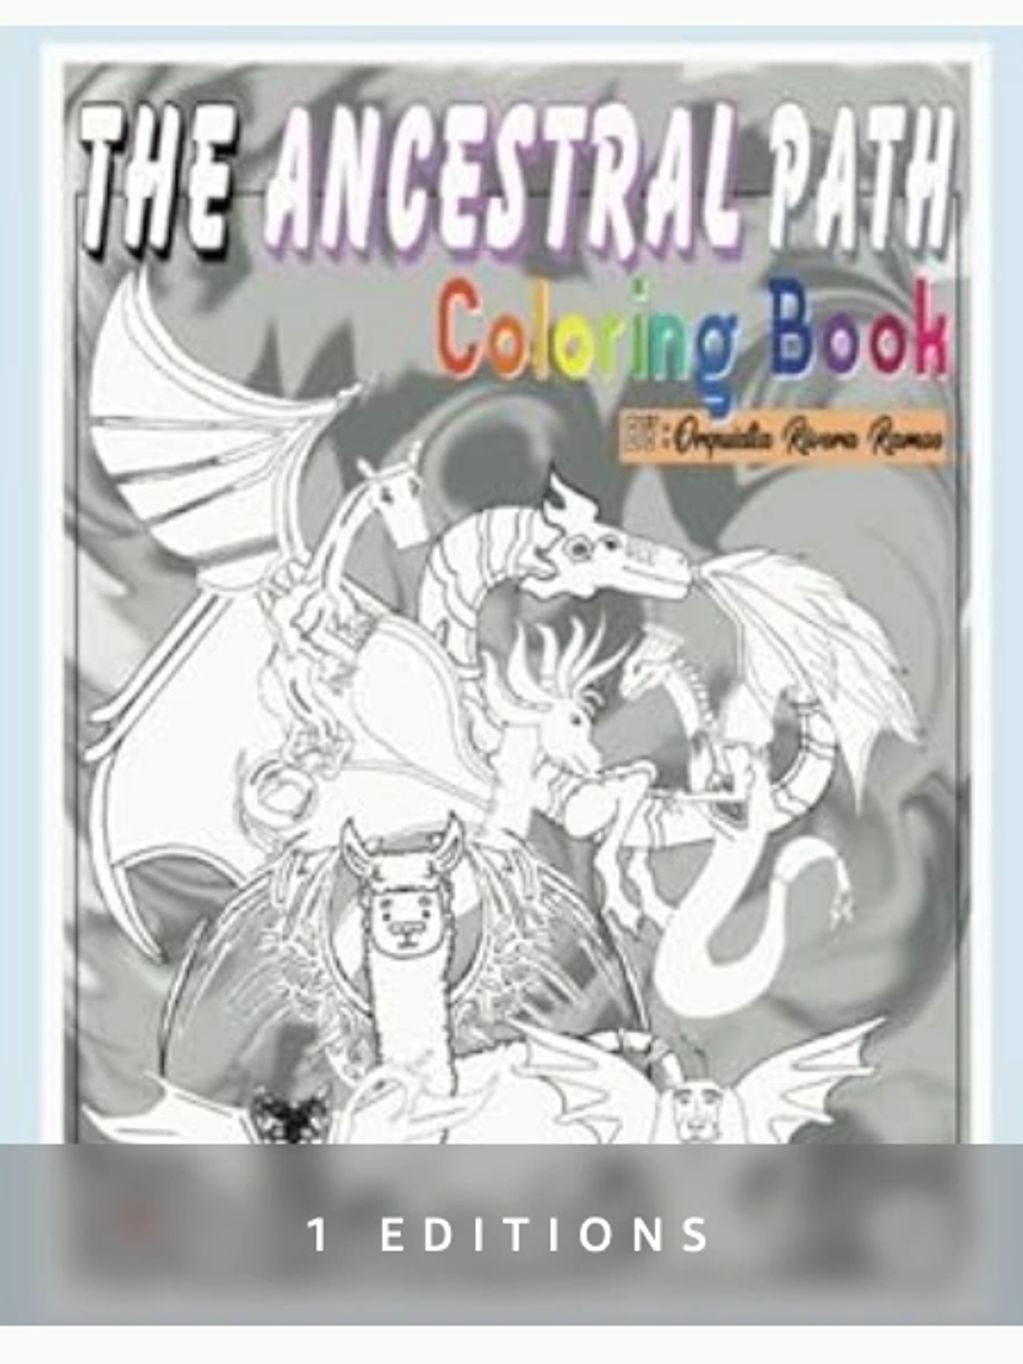 Coloring Book for book two The Ancestral Path. Includes dragons and fantasy creatures. 